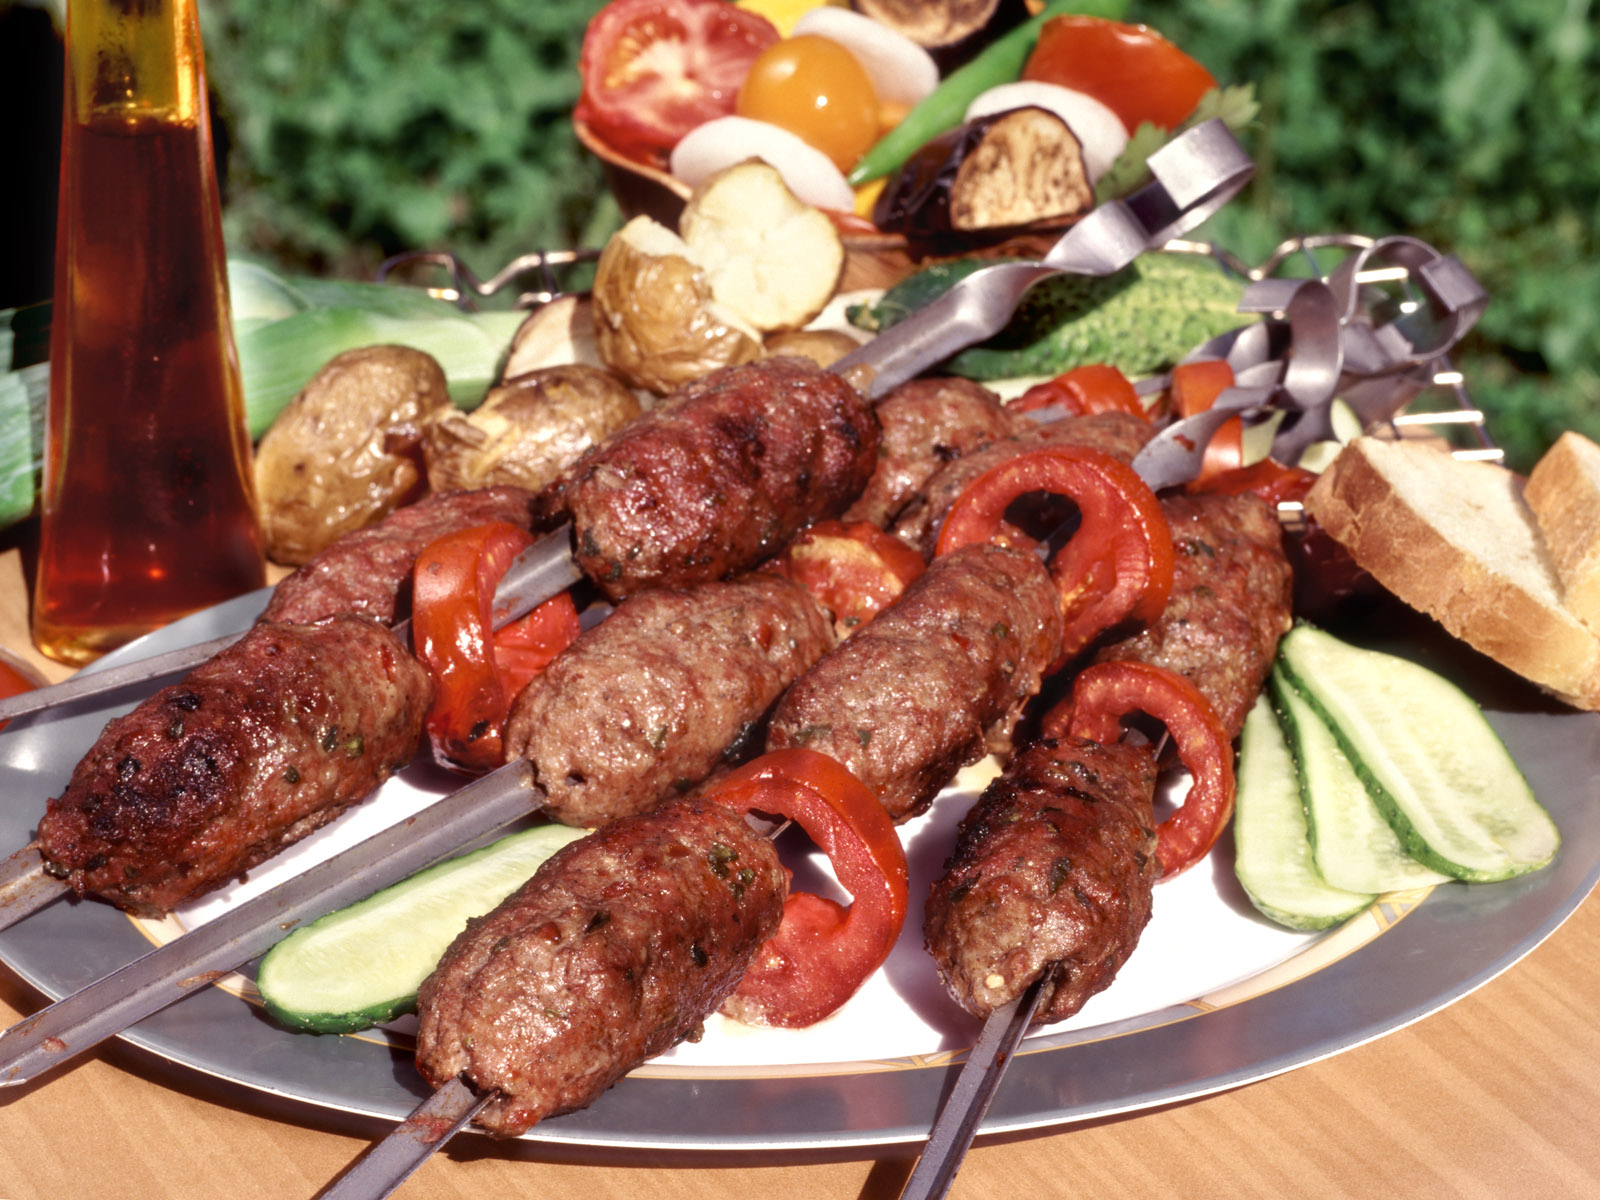 http://www.zastavki.com/pictures/1600x1200/2009/Food_Meat__barbecue_BBQ_sausages_011906_.jpg